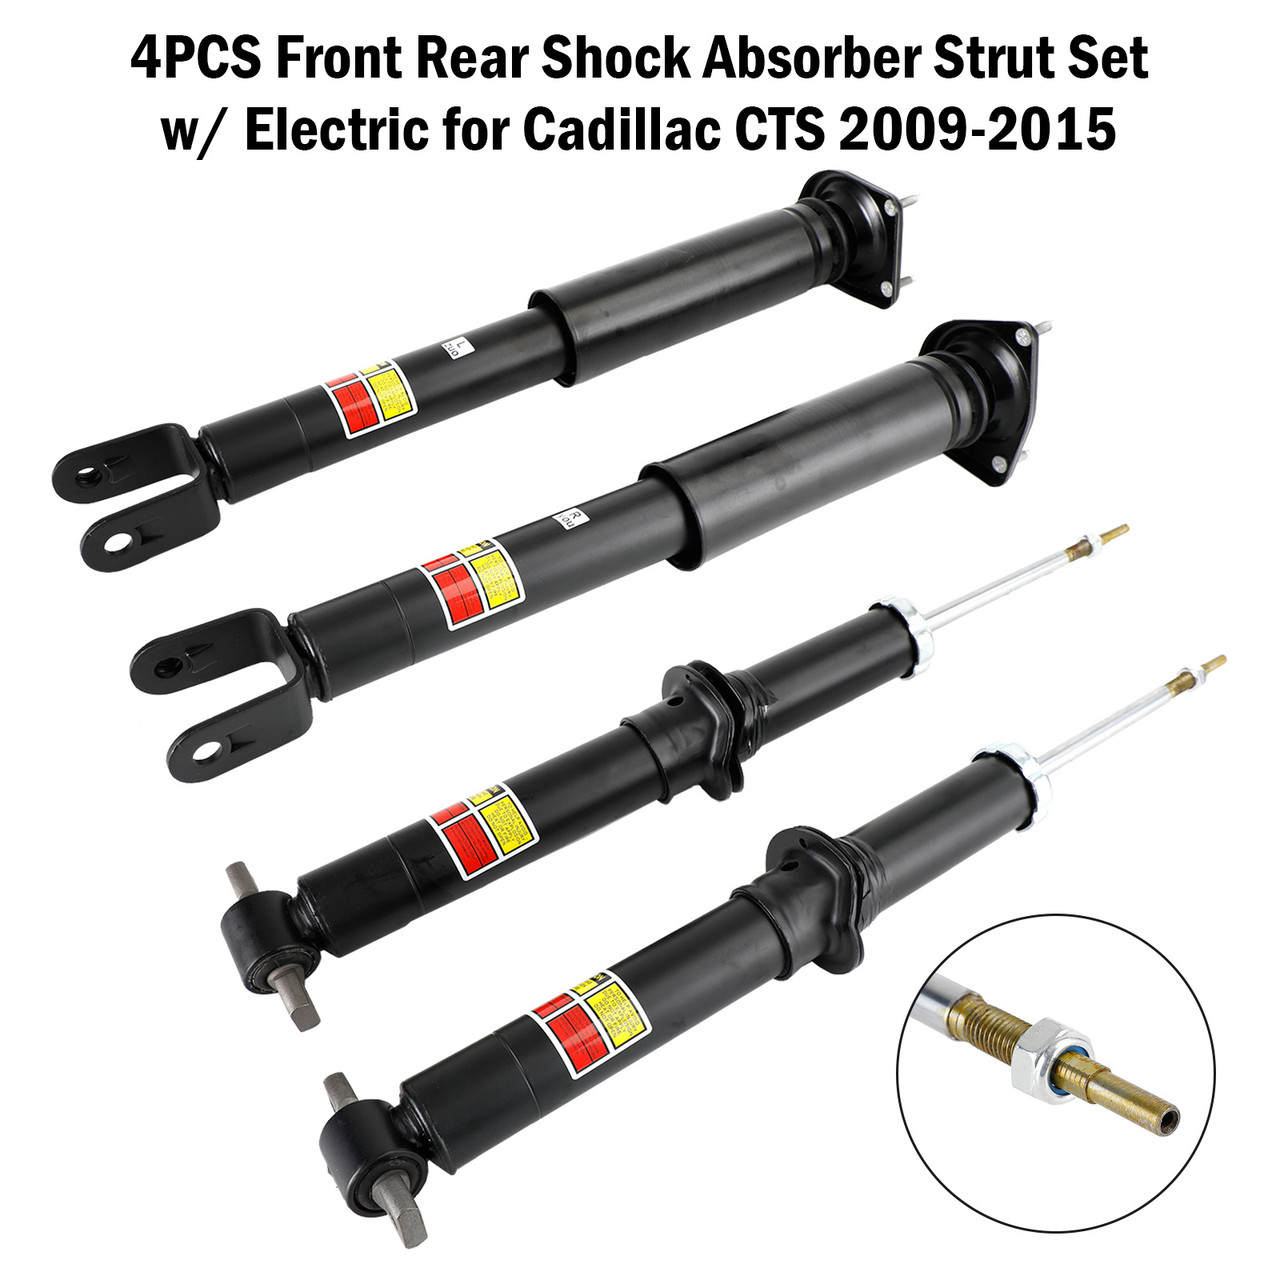 Cadillac CTS 2009-2015 4PCS Front Rear Shock Absorber Strut Set w/ Electric